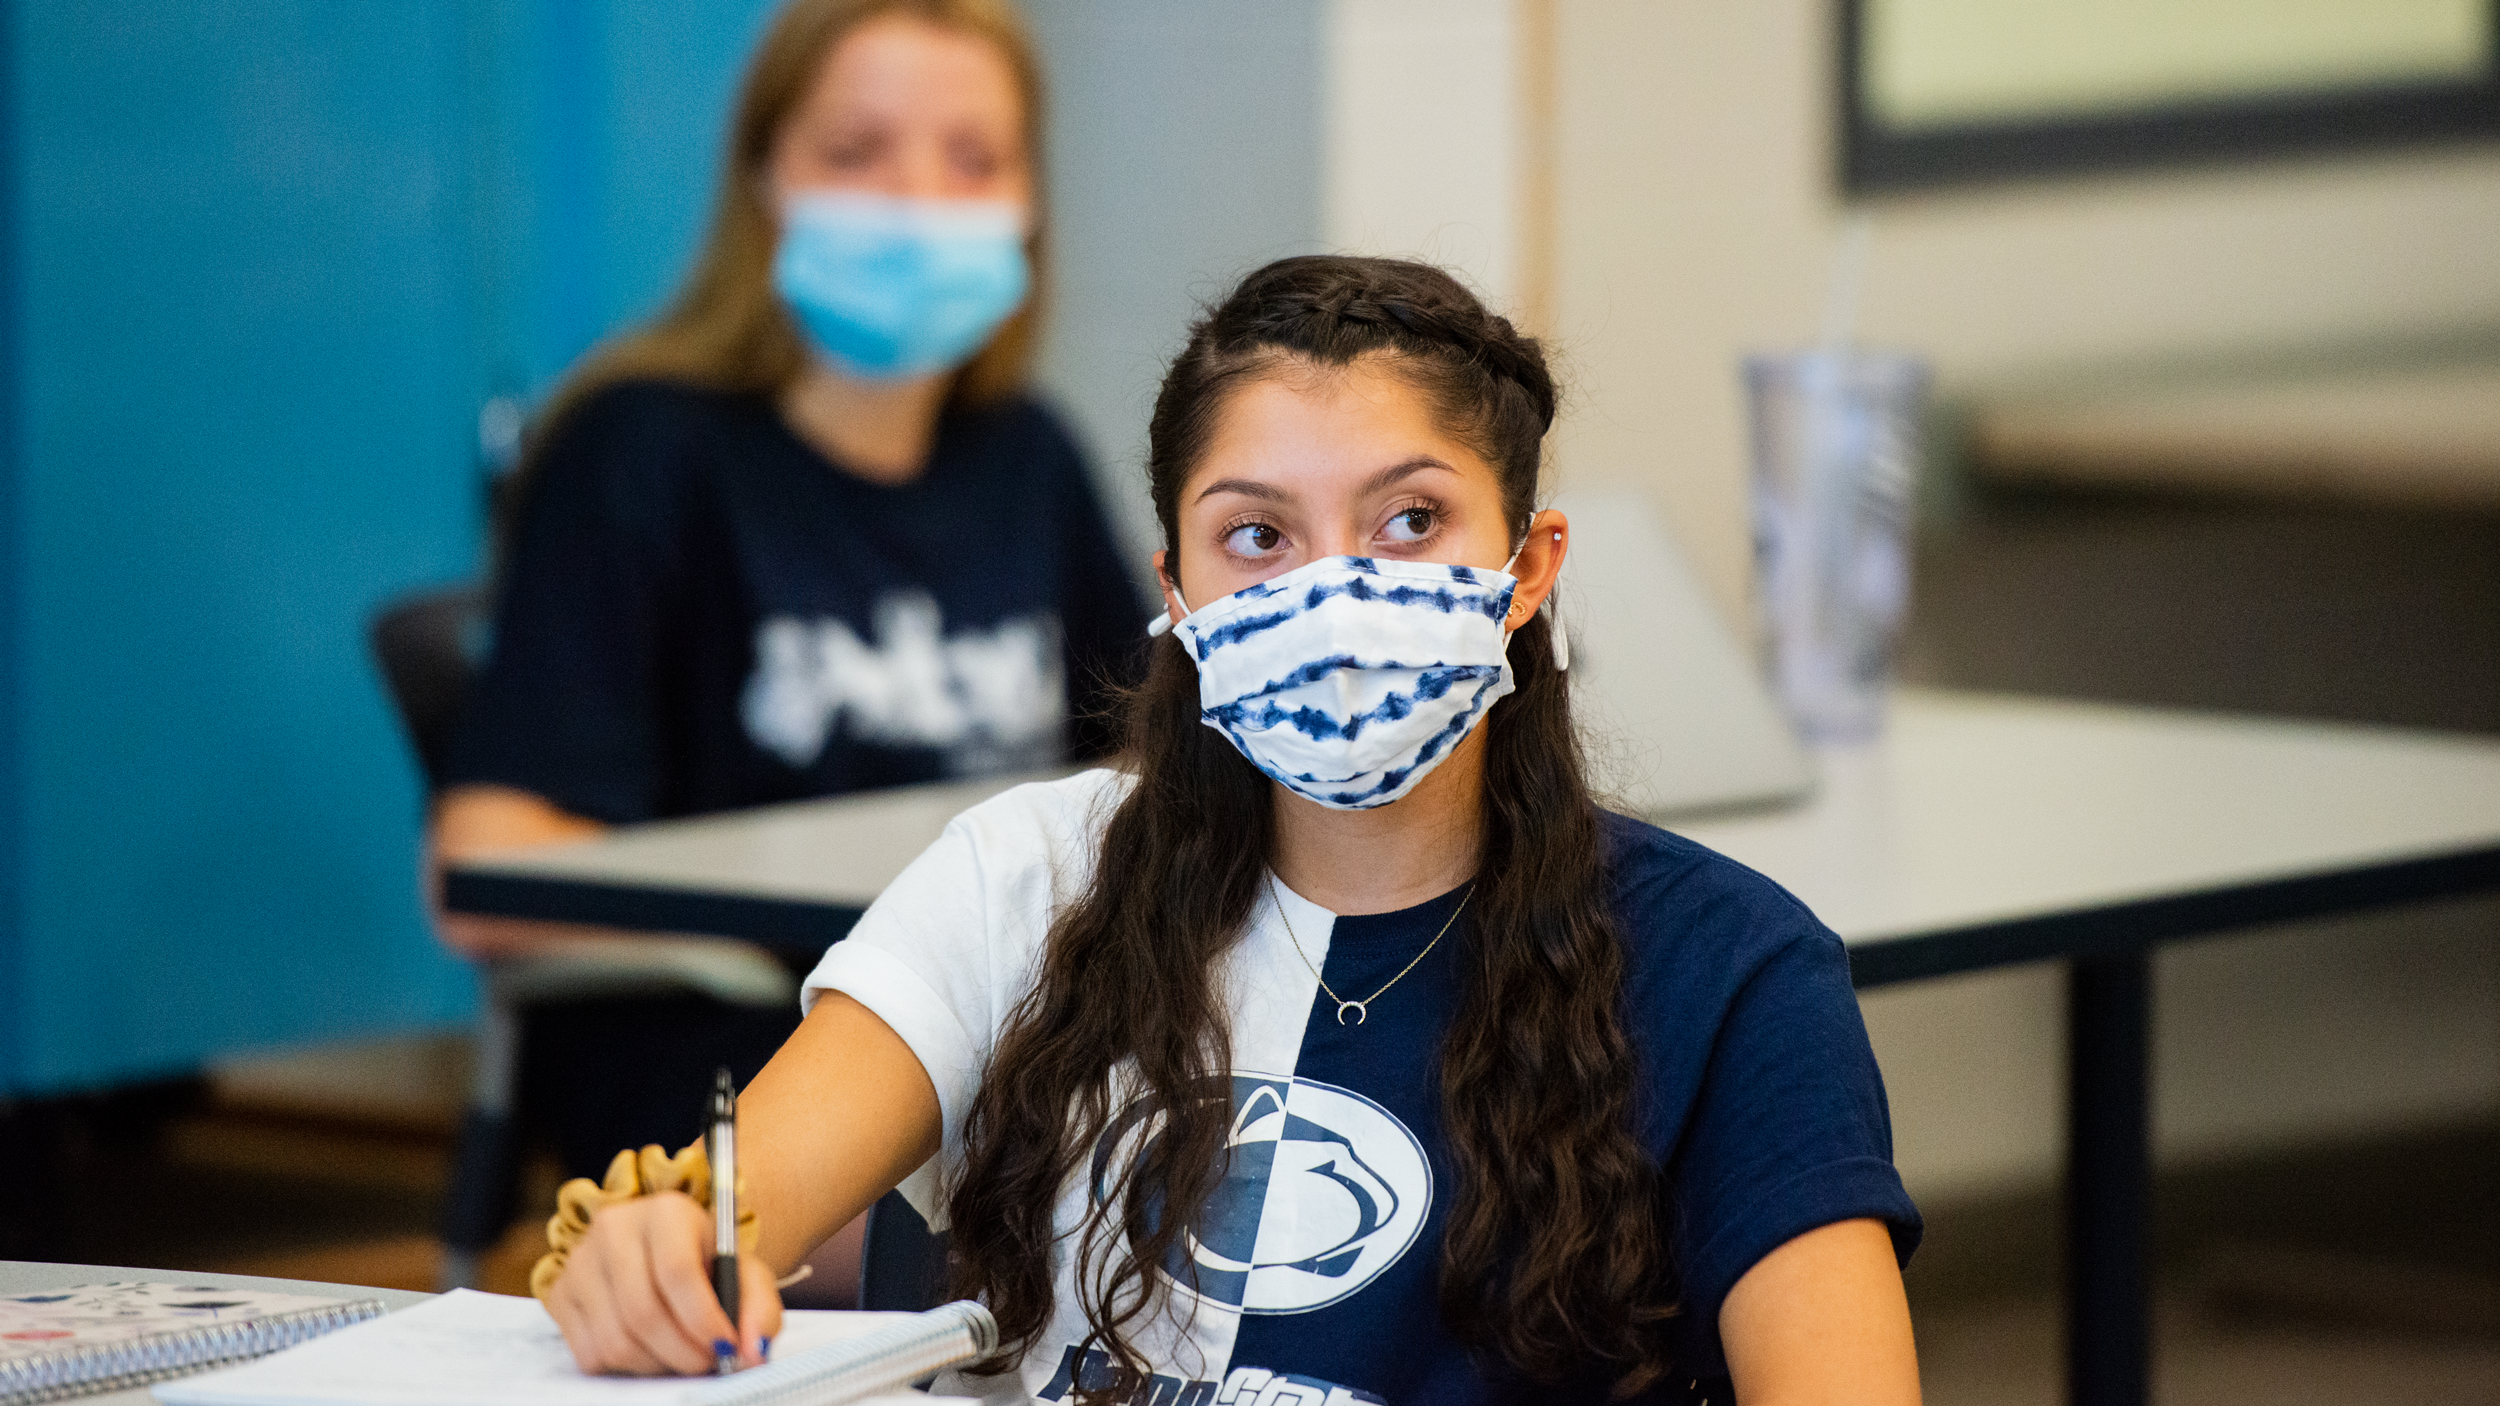 Students in class wearing masks.